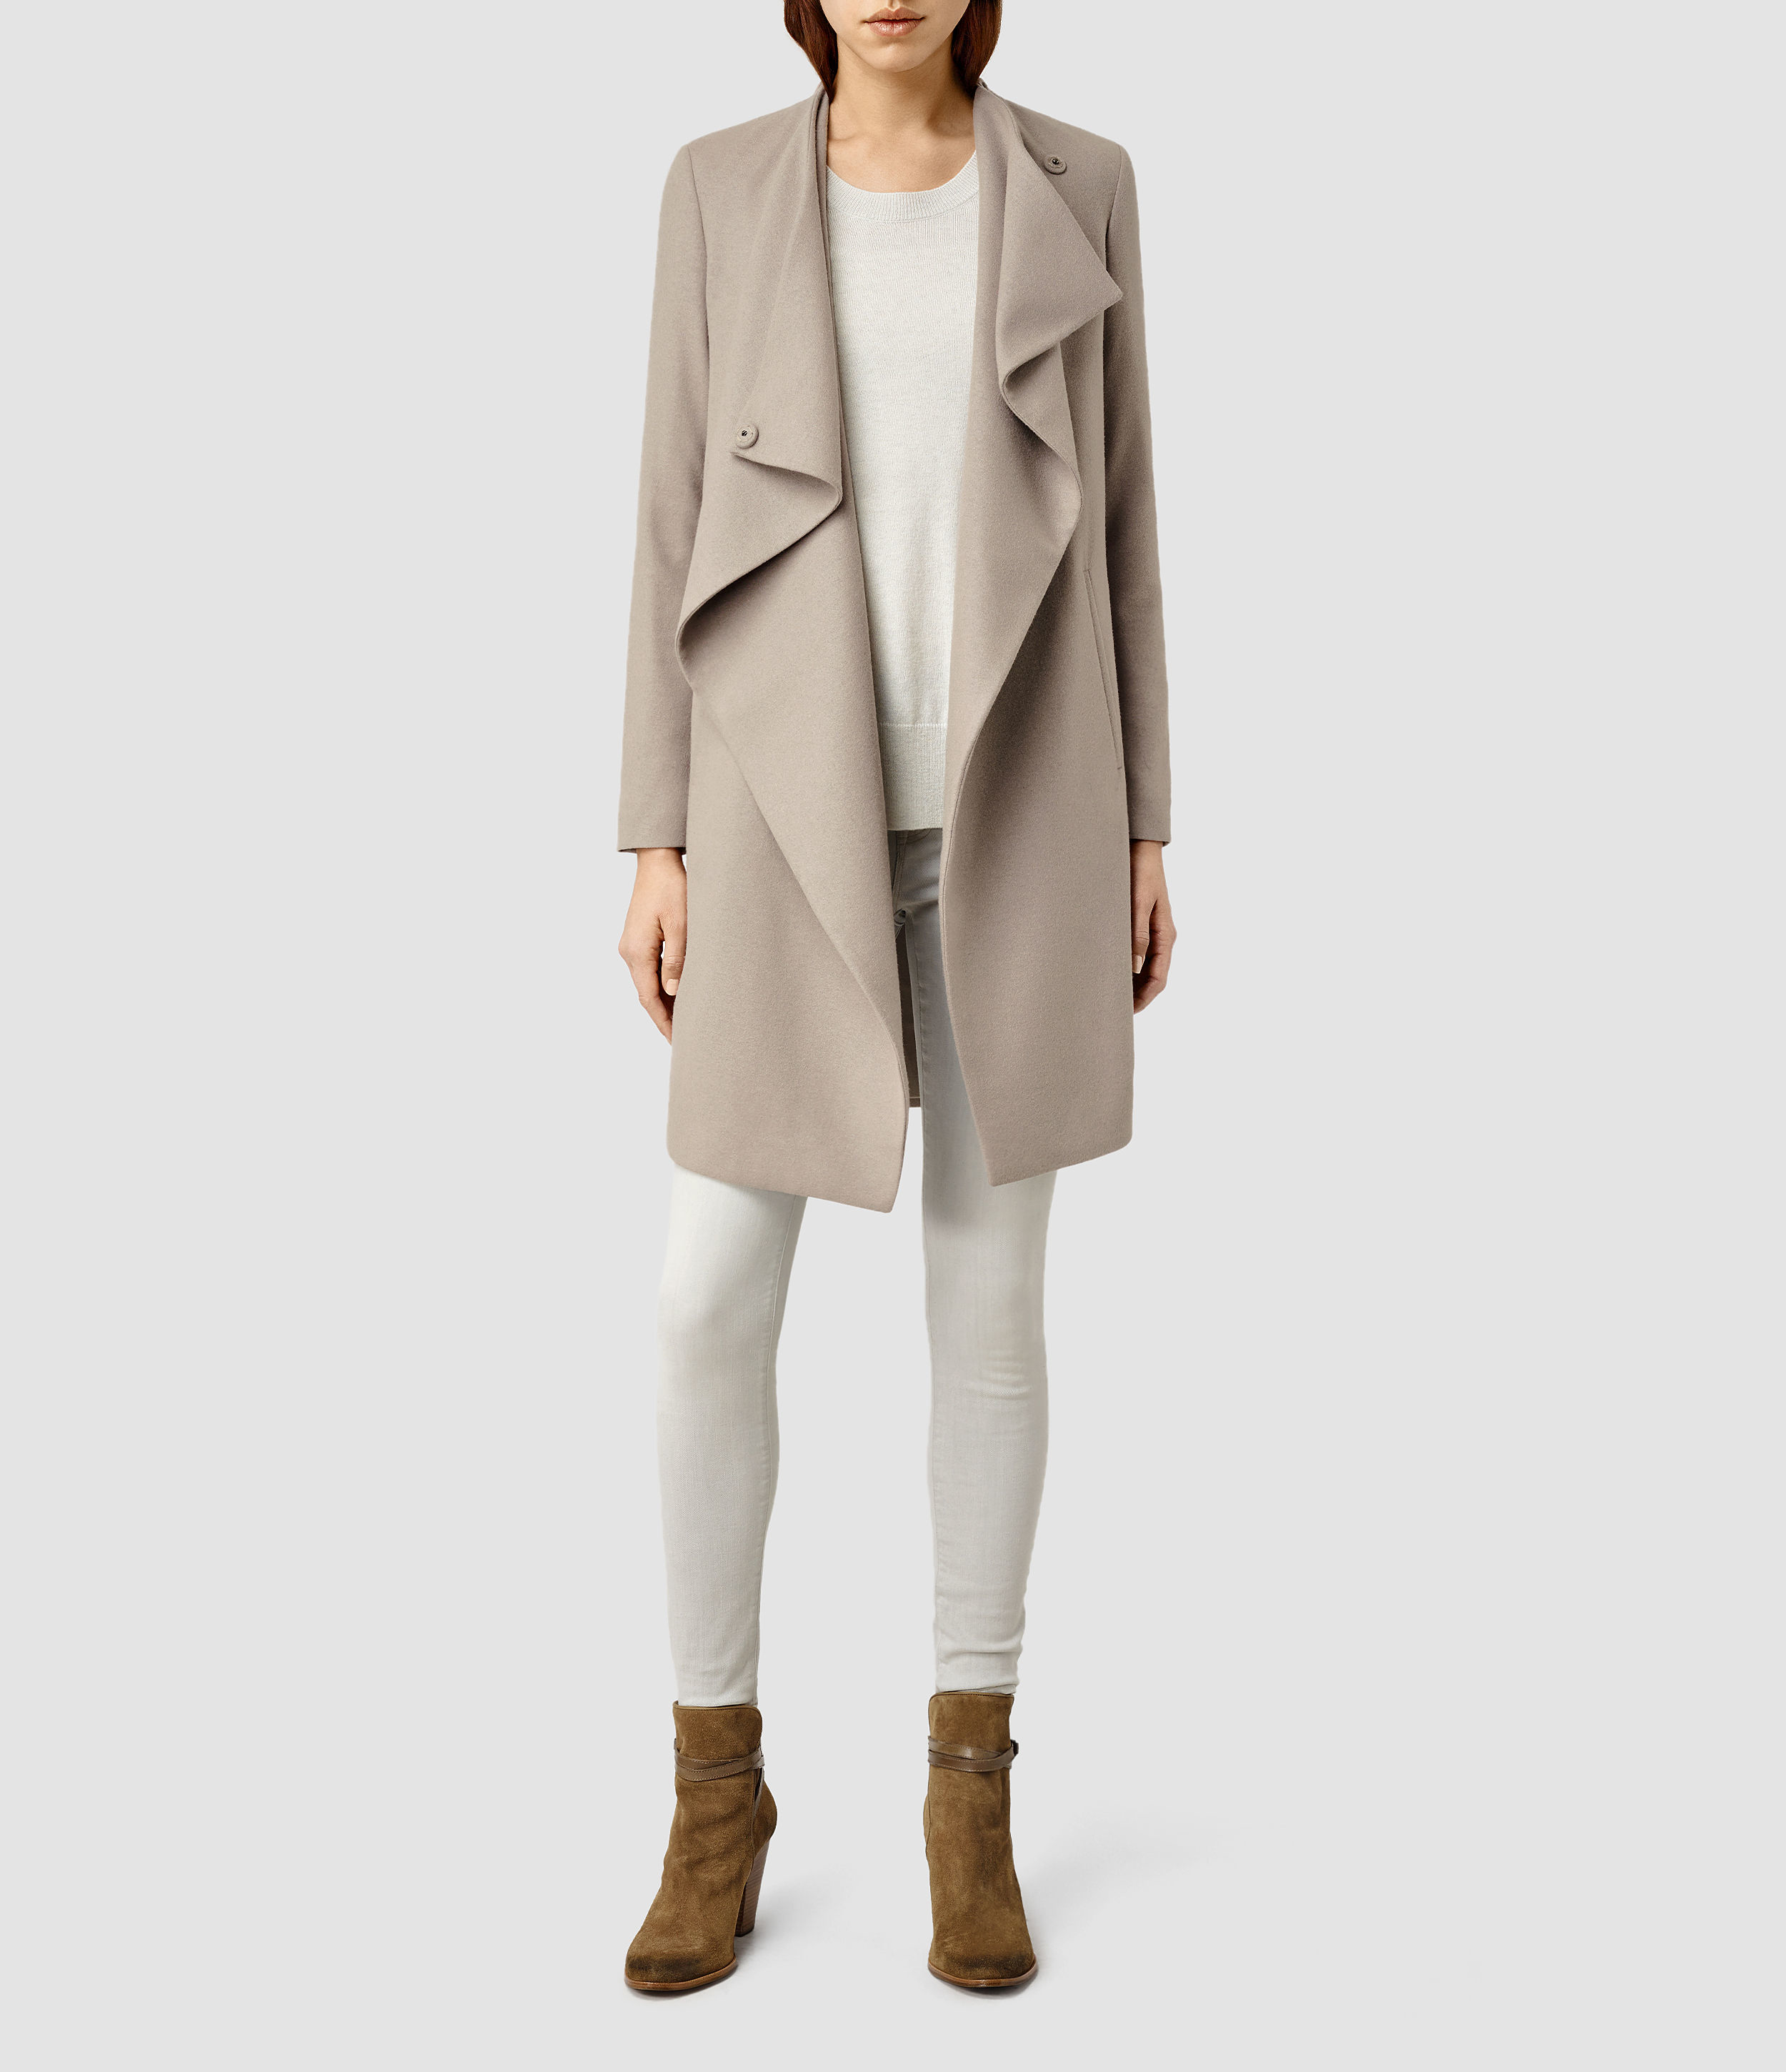 AllSaints Ora Coat Usa Usa in Taupe/Grey (Brown) - Lyst